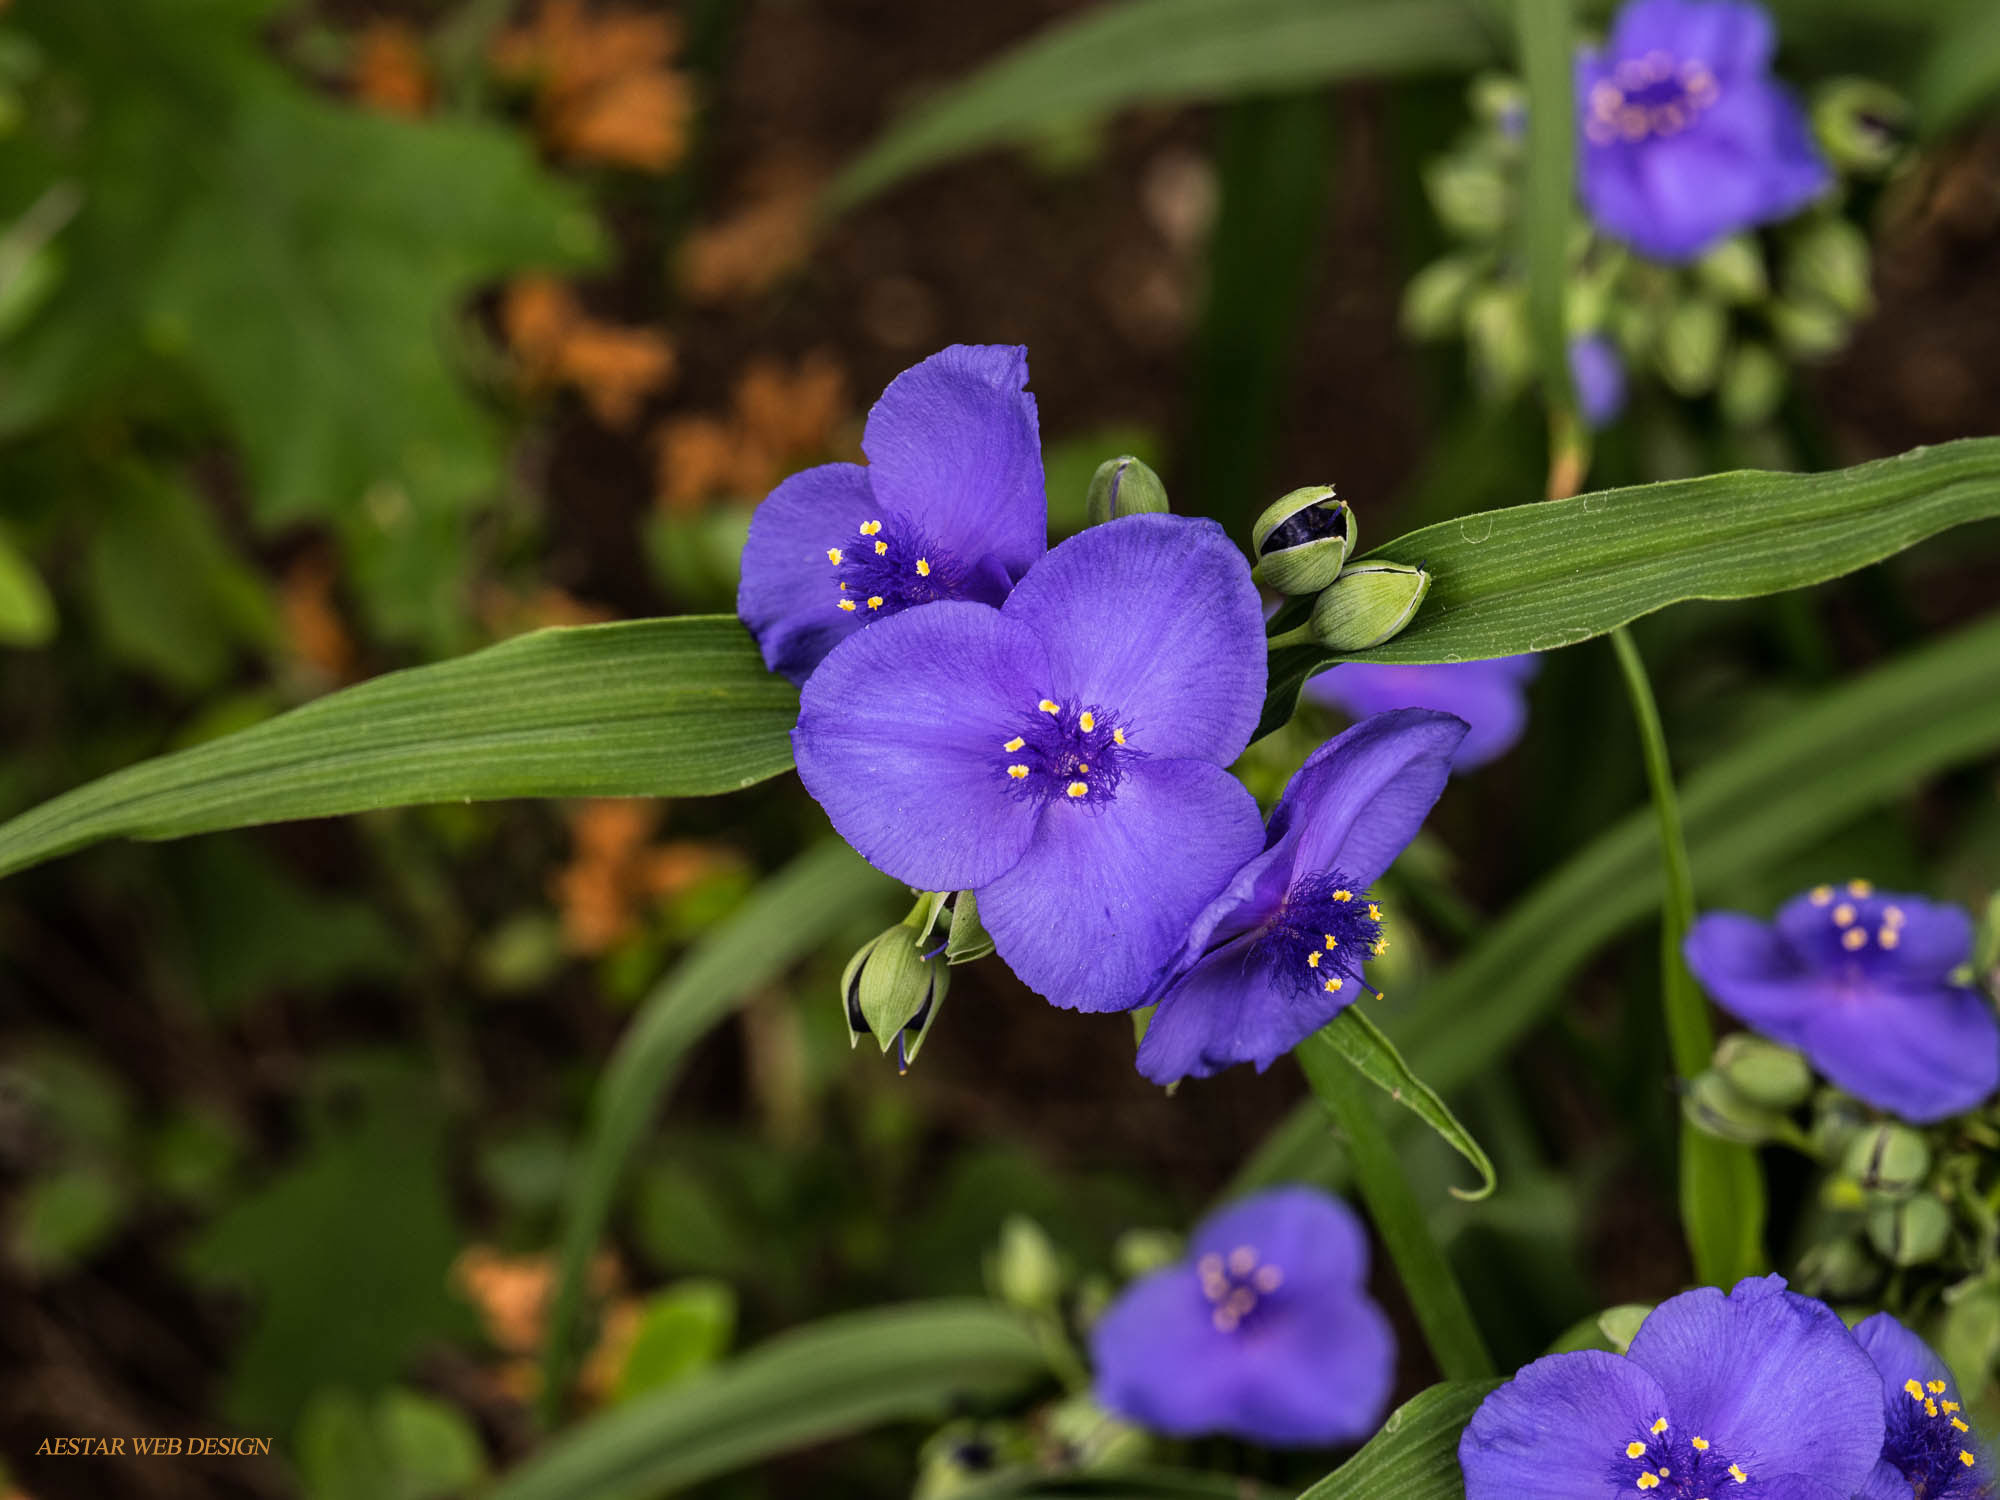 Web Product Photography, Flowers, Tradescantia, New York City